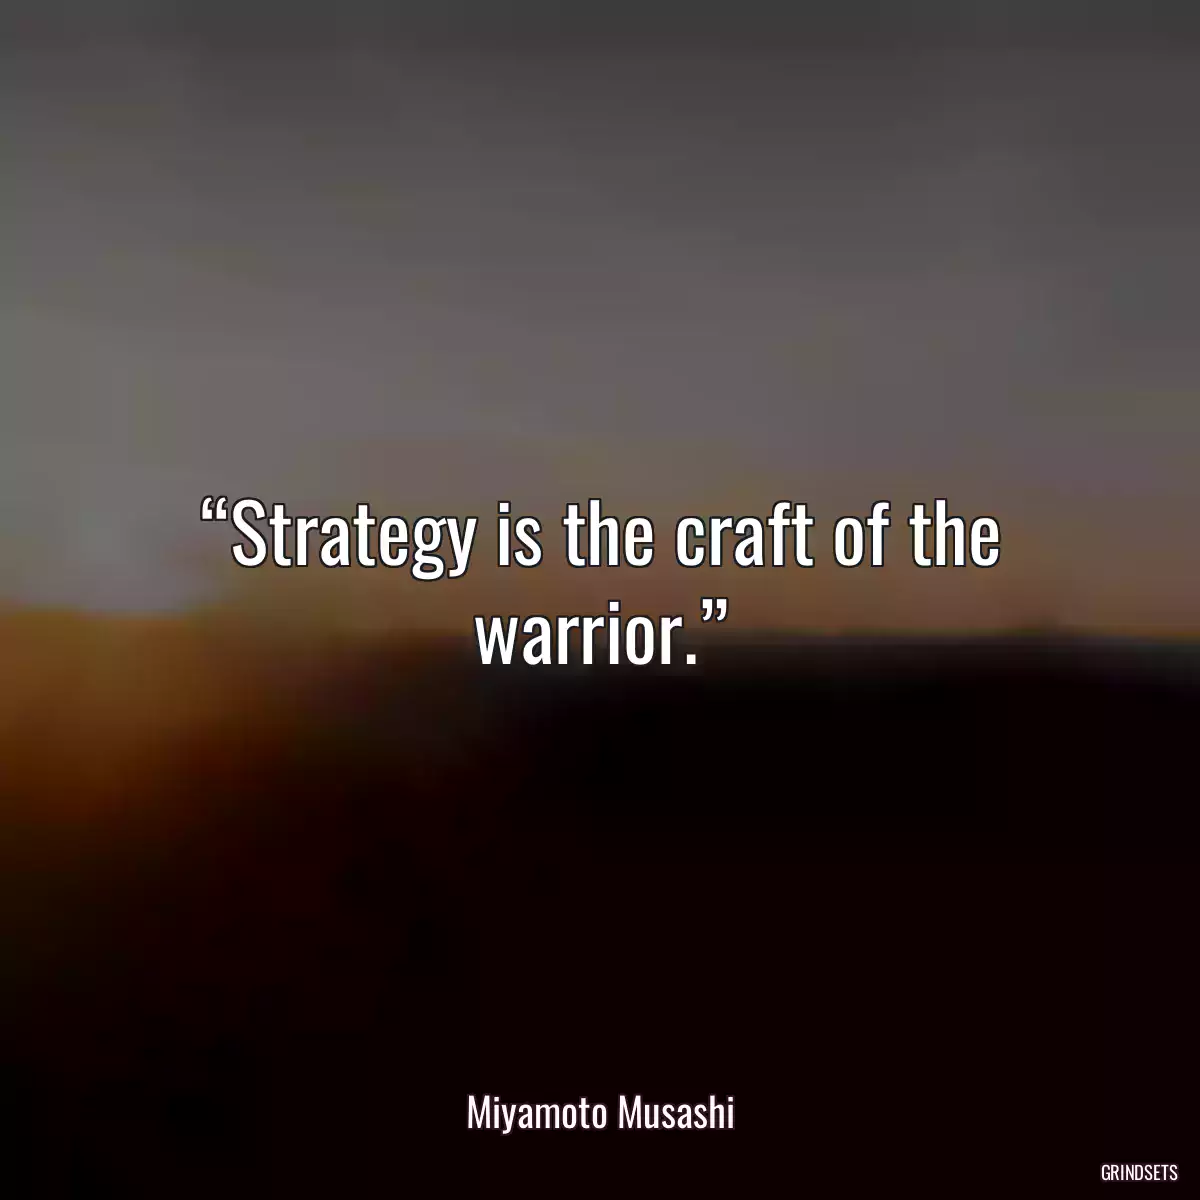 “Strategy is the craft of the warrior.”